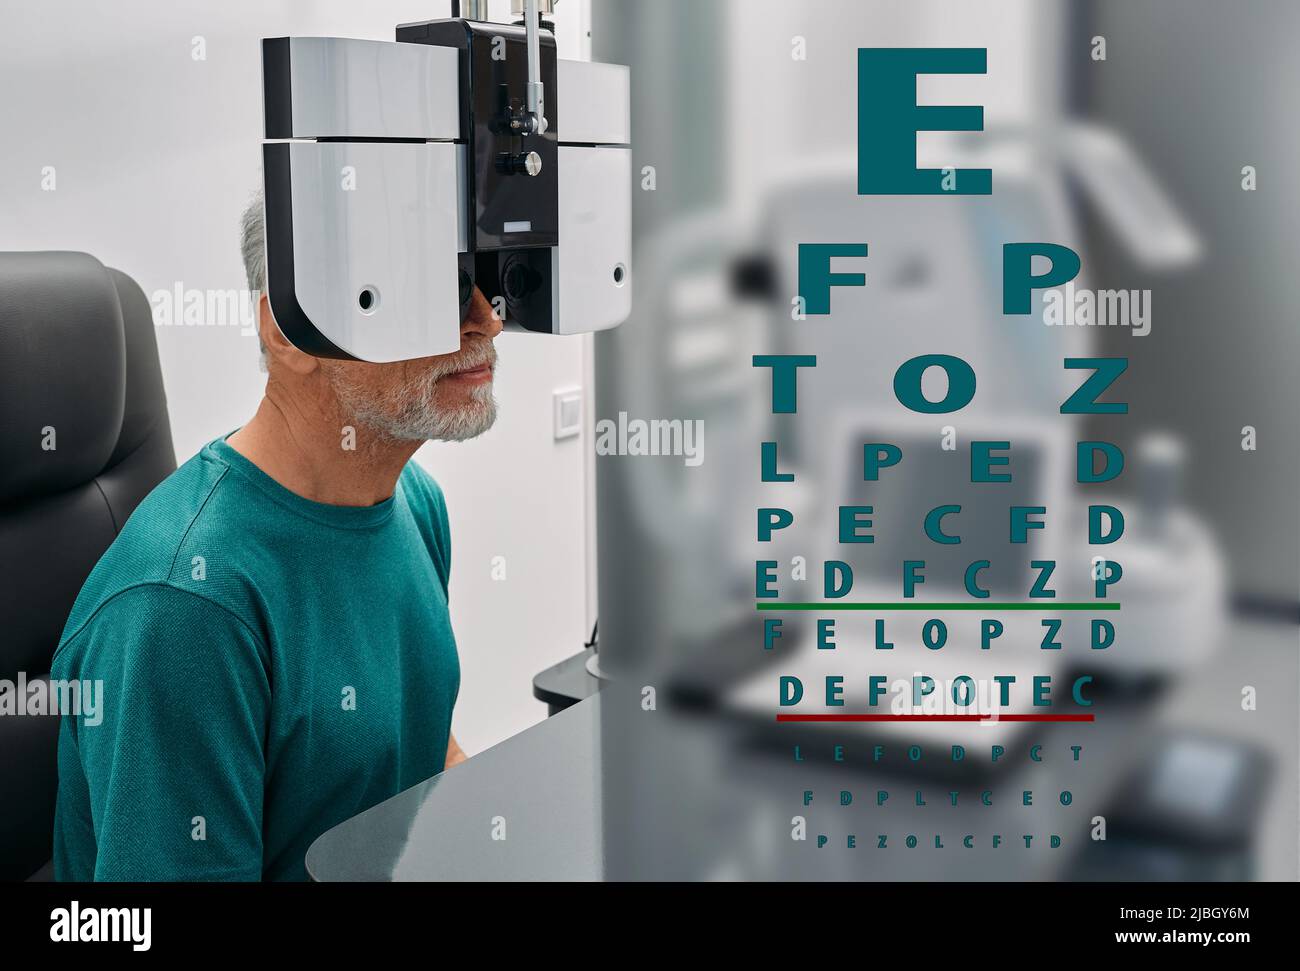 https://c8.alamy.com/comp/2JBGY6M/checking-senior-mans-eyesight-using-ophthalmology-phoropter-with-snellen-eye-chart-at-medical-clinic-eye-test-vision-diagnostic-concept-2JBGY6M.jpg